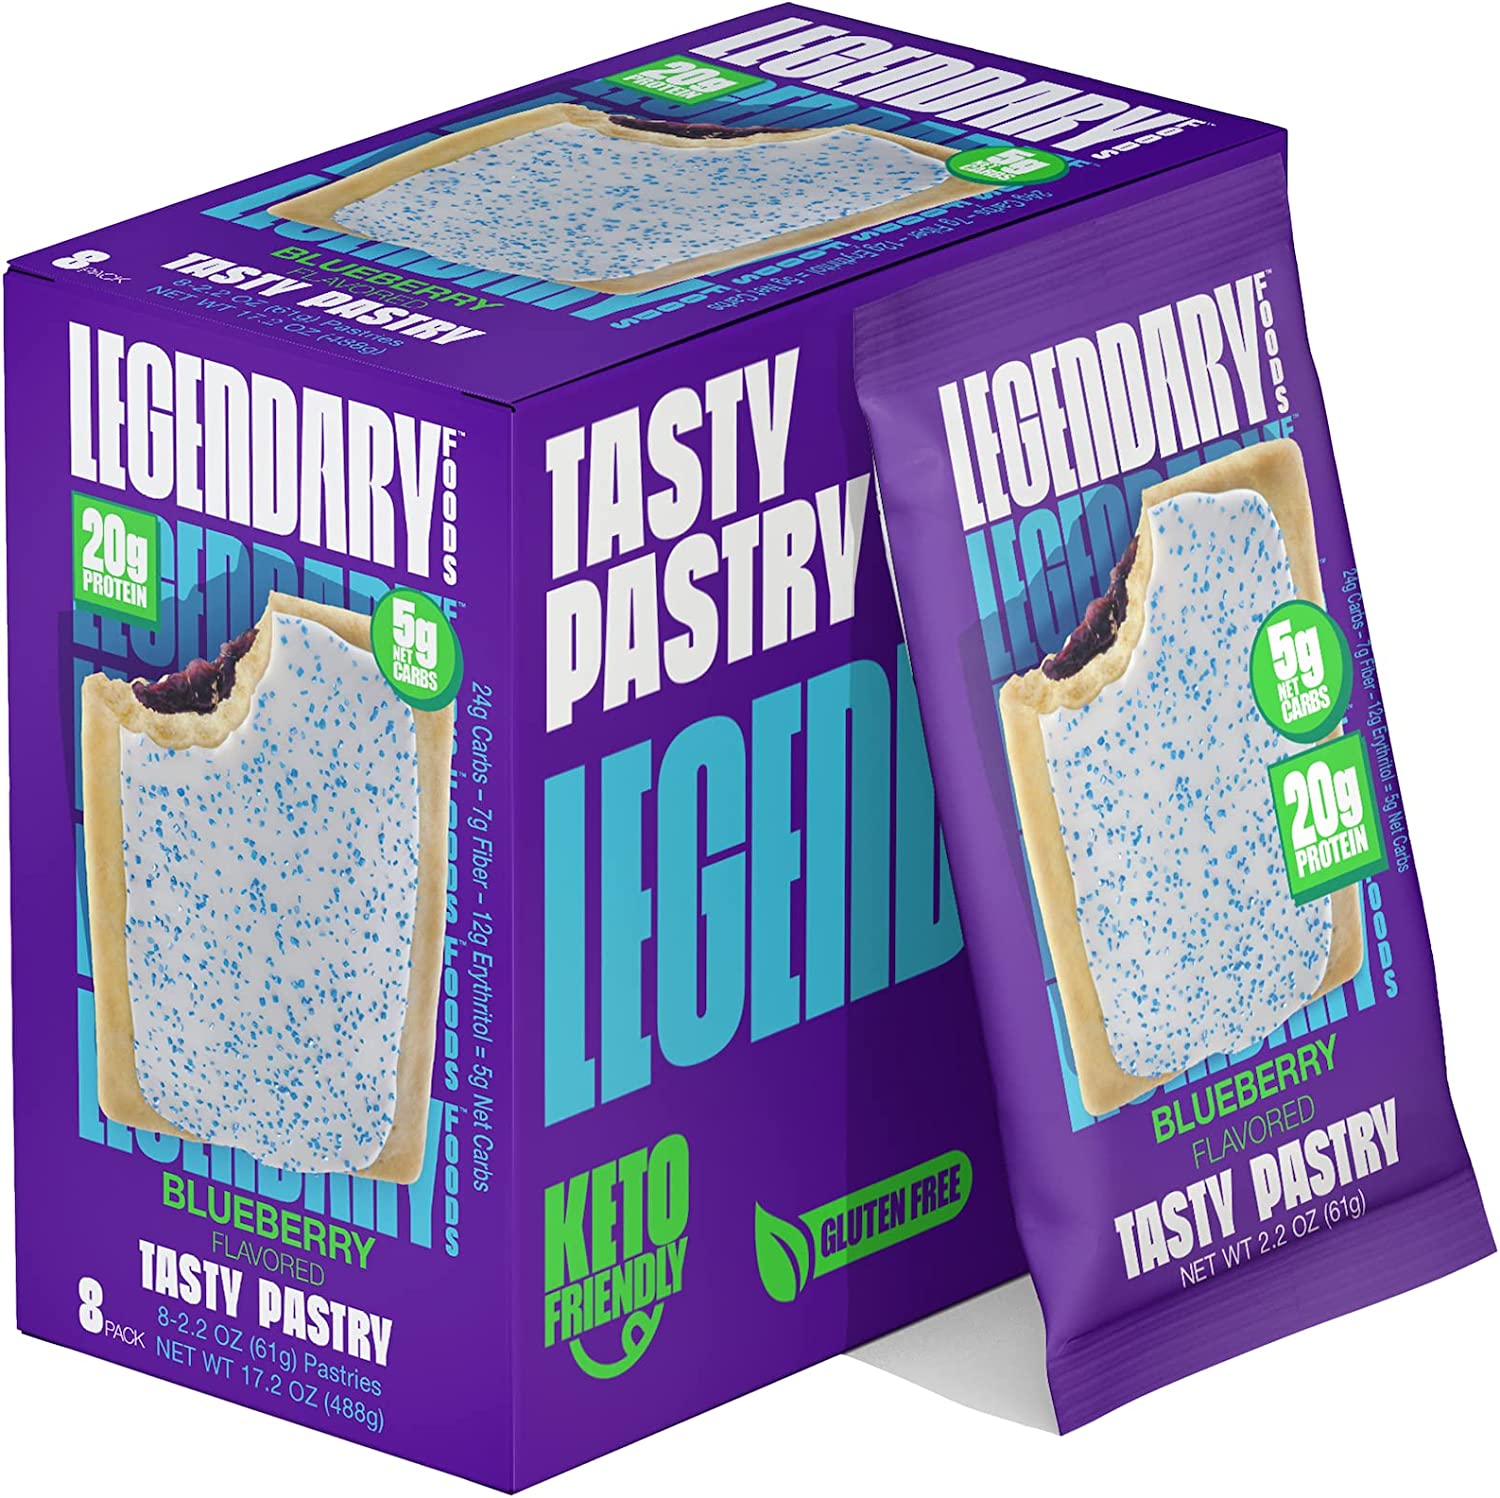 Legendary Foods 20 gr Protein Bar Alternative Tasty Pastry | Low Carb gluten free | Keto Friendly | No Sugar Added | High Protein Snacks | On-The-Go Breakfast | Keto Food – Blueberry (8-Pack)